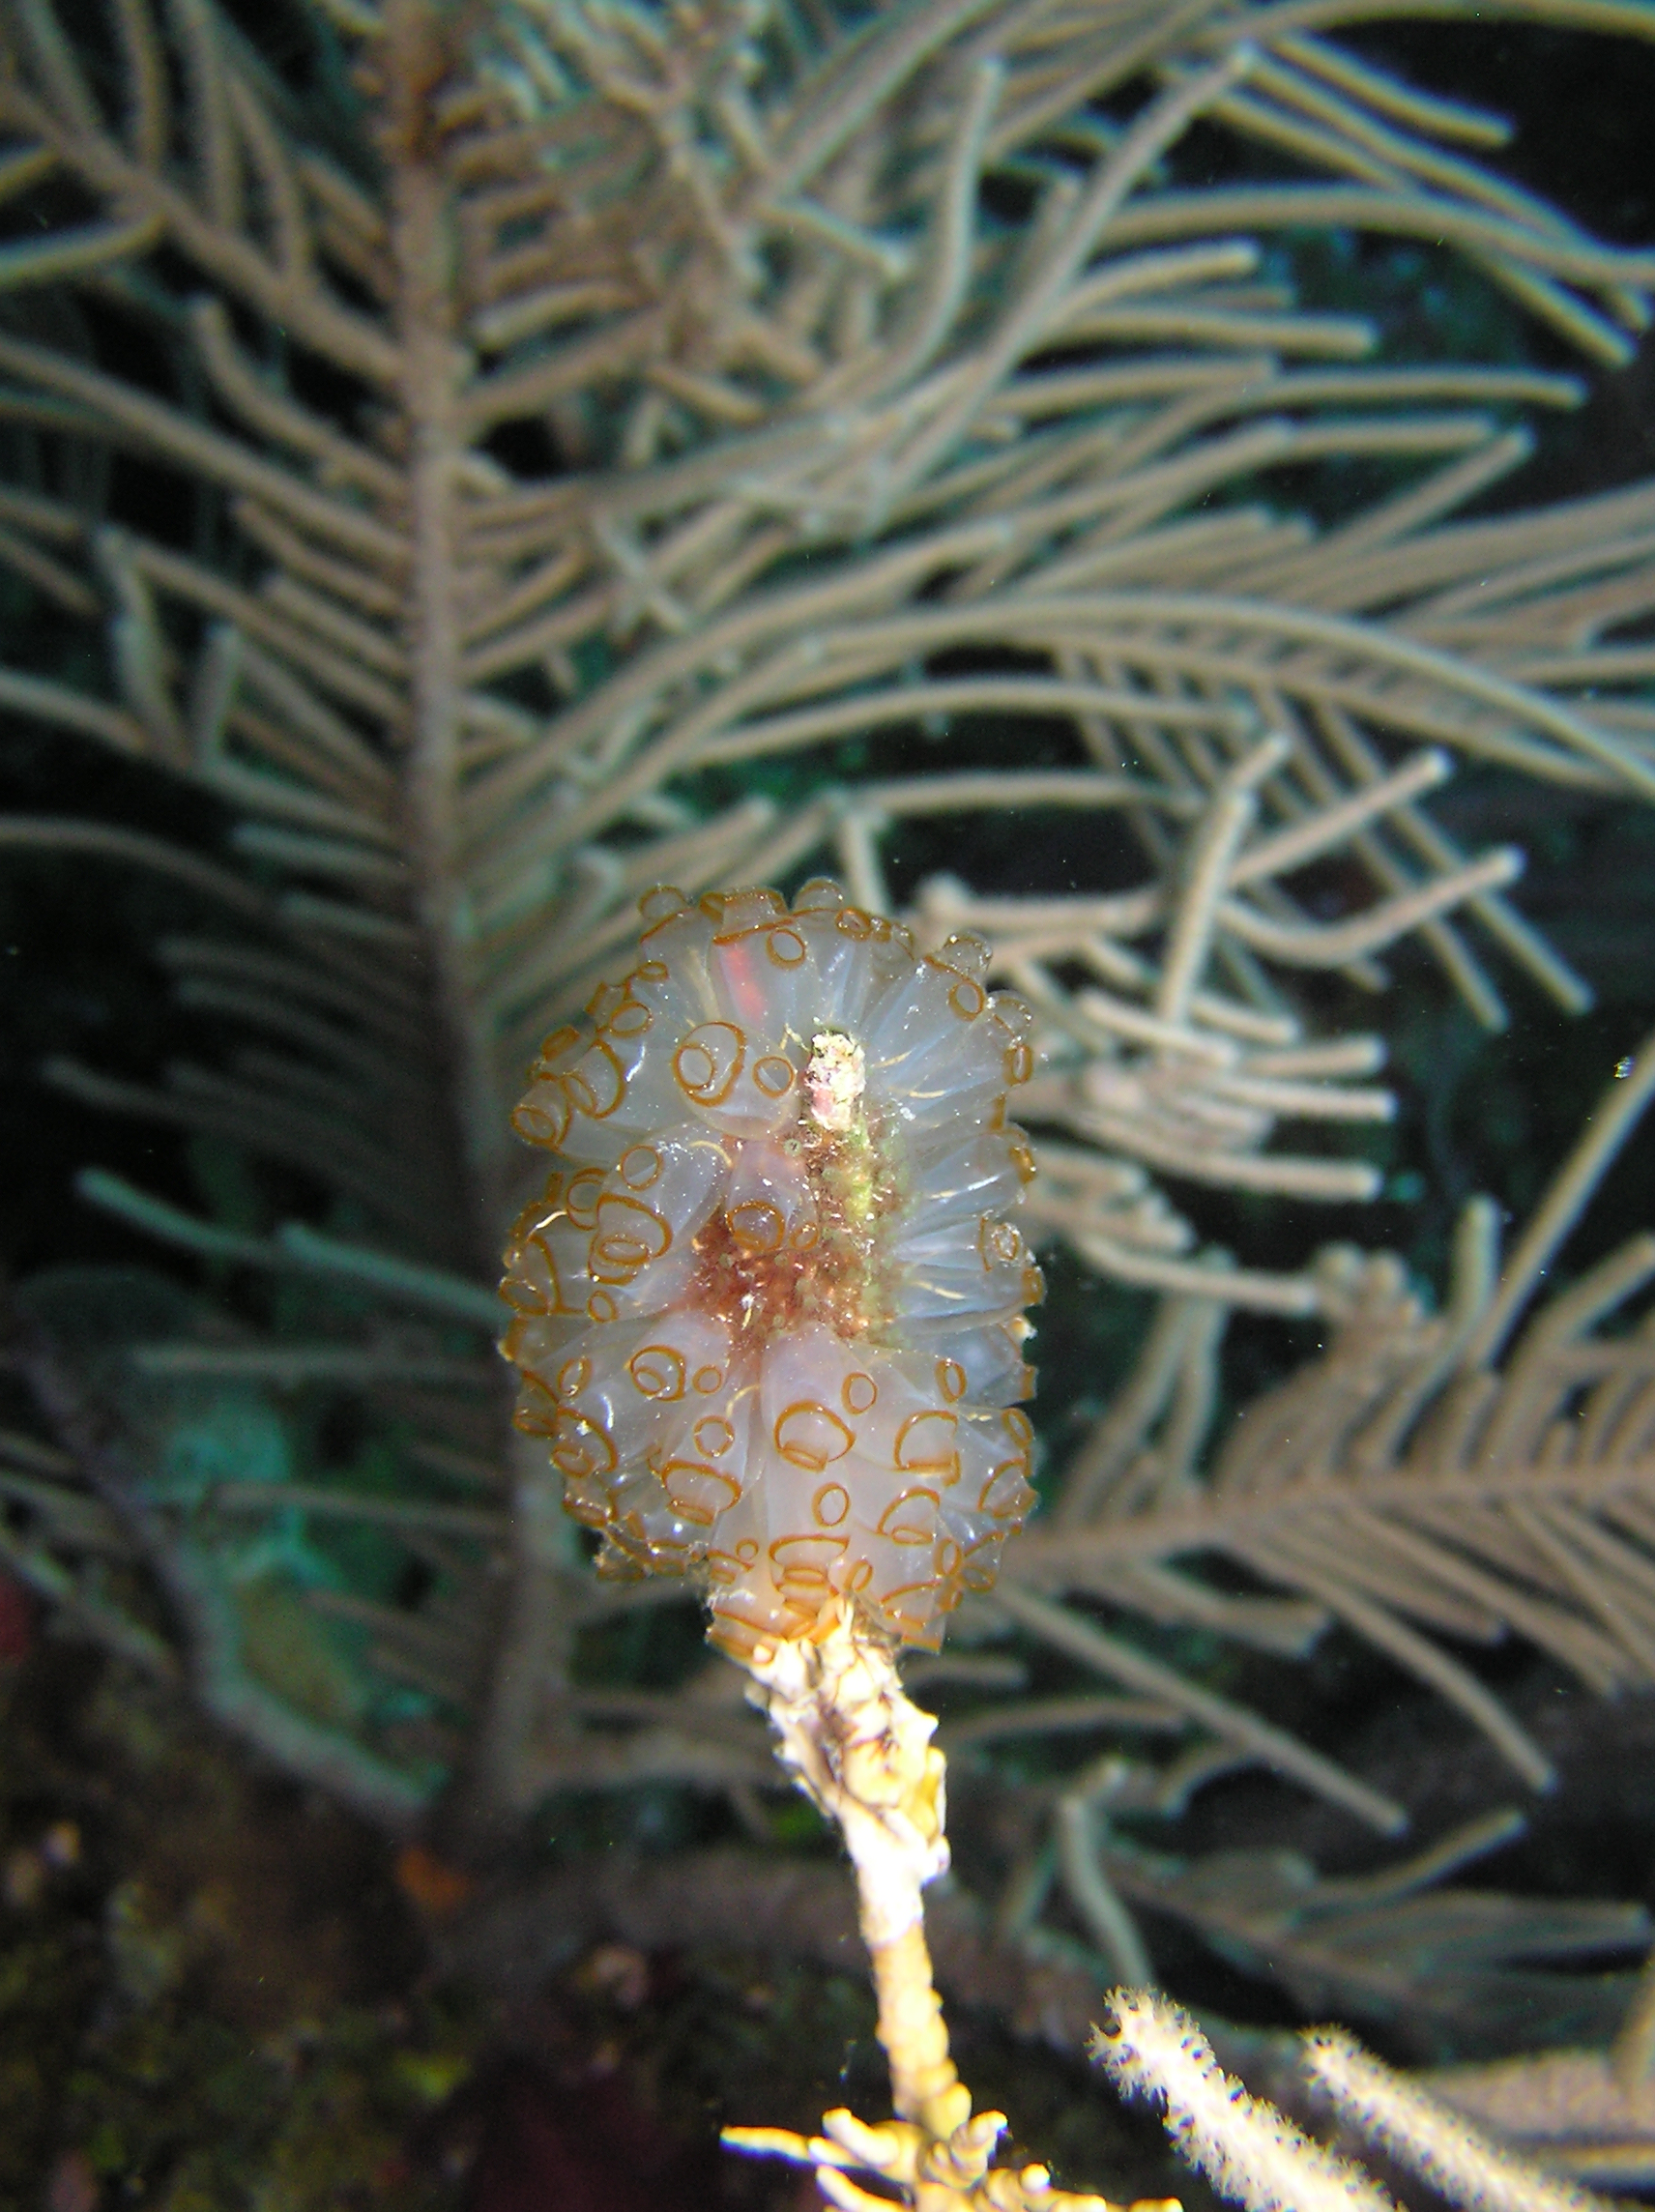 Painted Tunicates